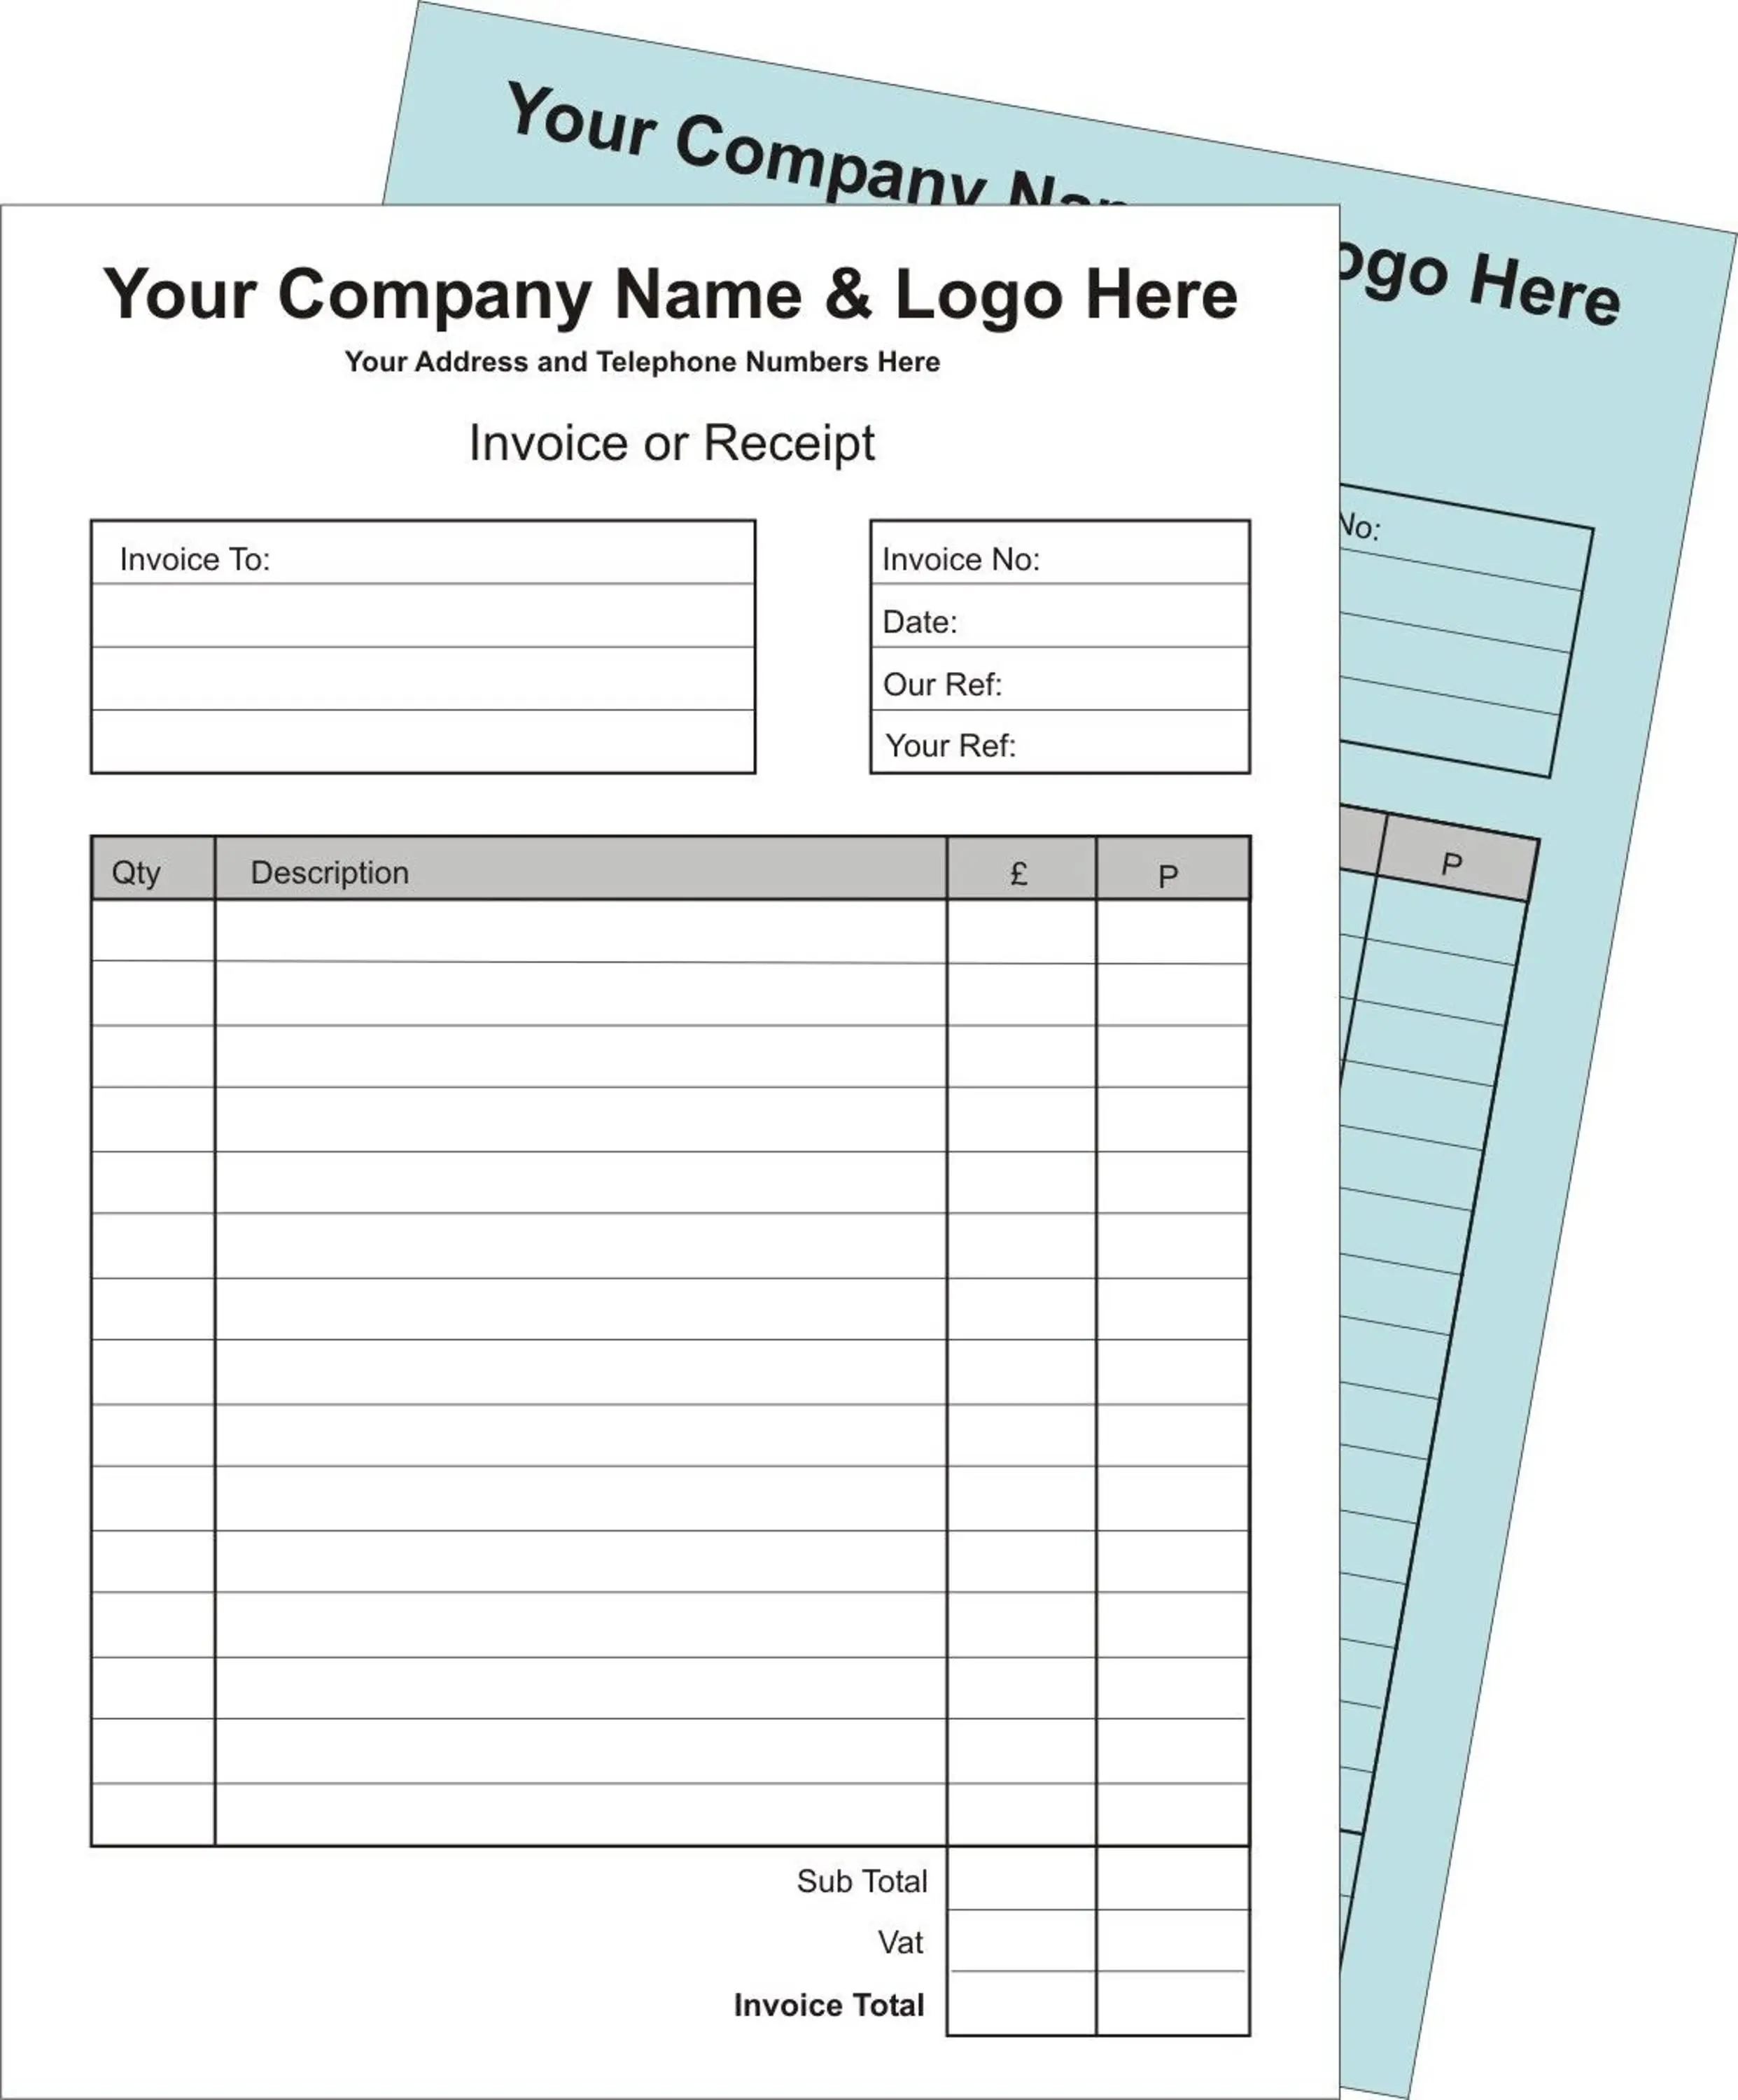 BOOKS PRINT NCR PERSONALISED DUPLICATE A5 INVOICE PADS RECEIPT/ ORDER 